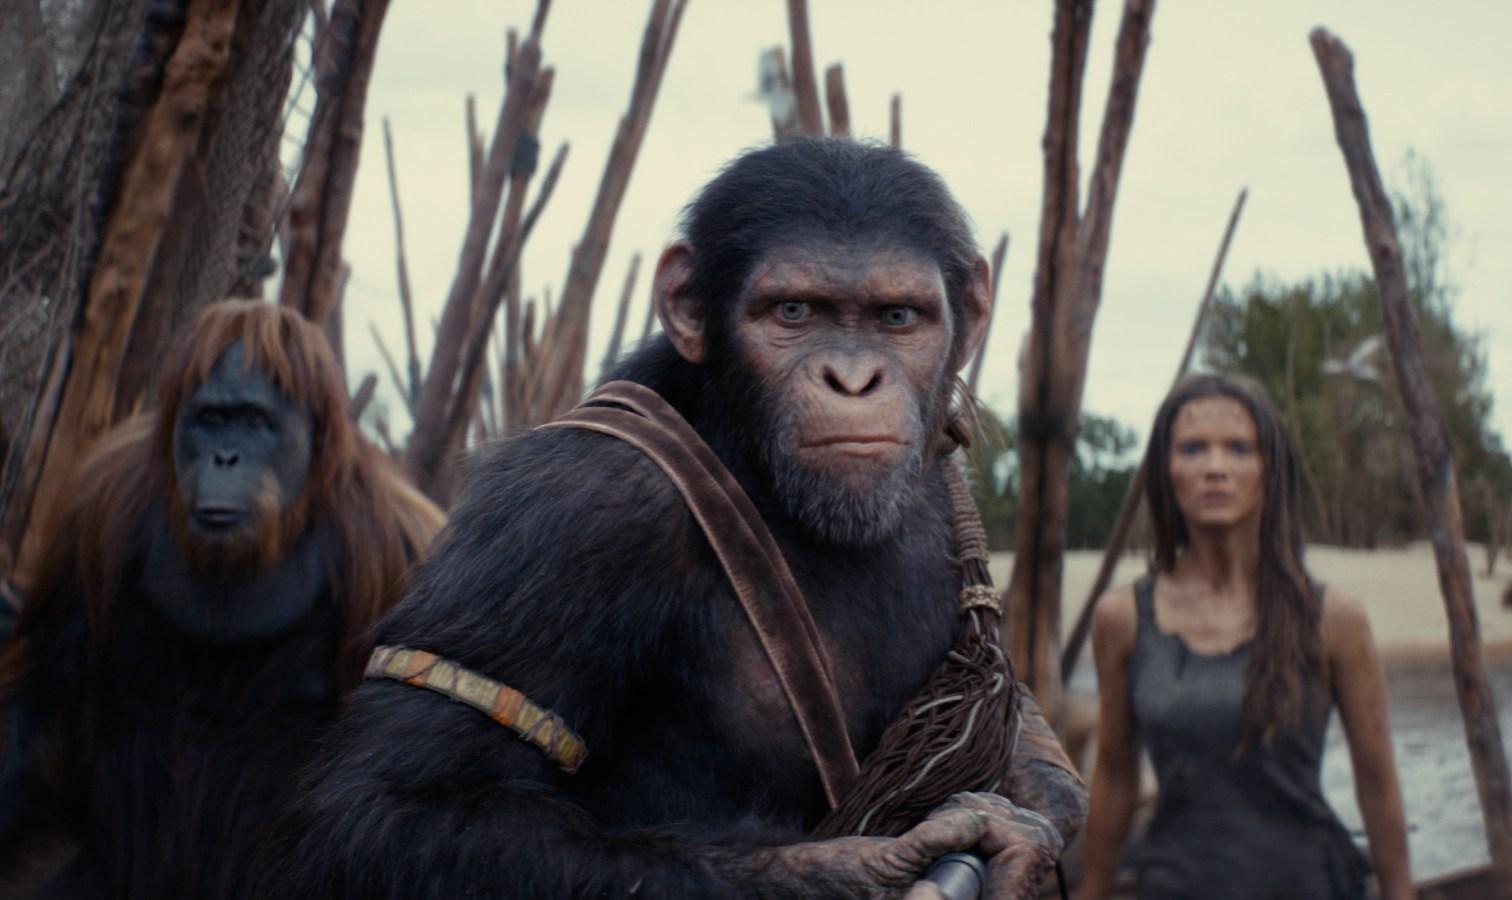 The Kingdom of the Planet of the Apes takes the first Evolutionary step backwards